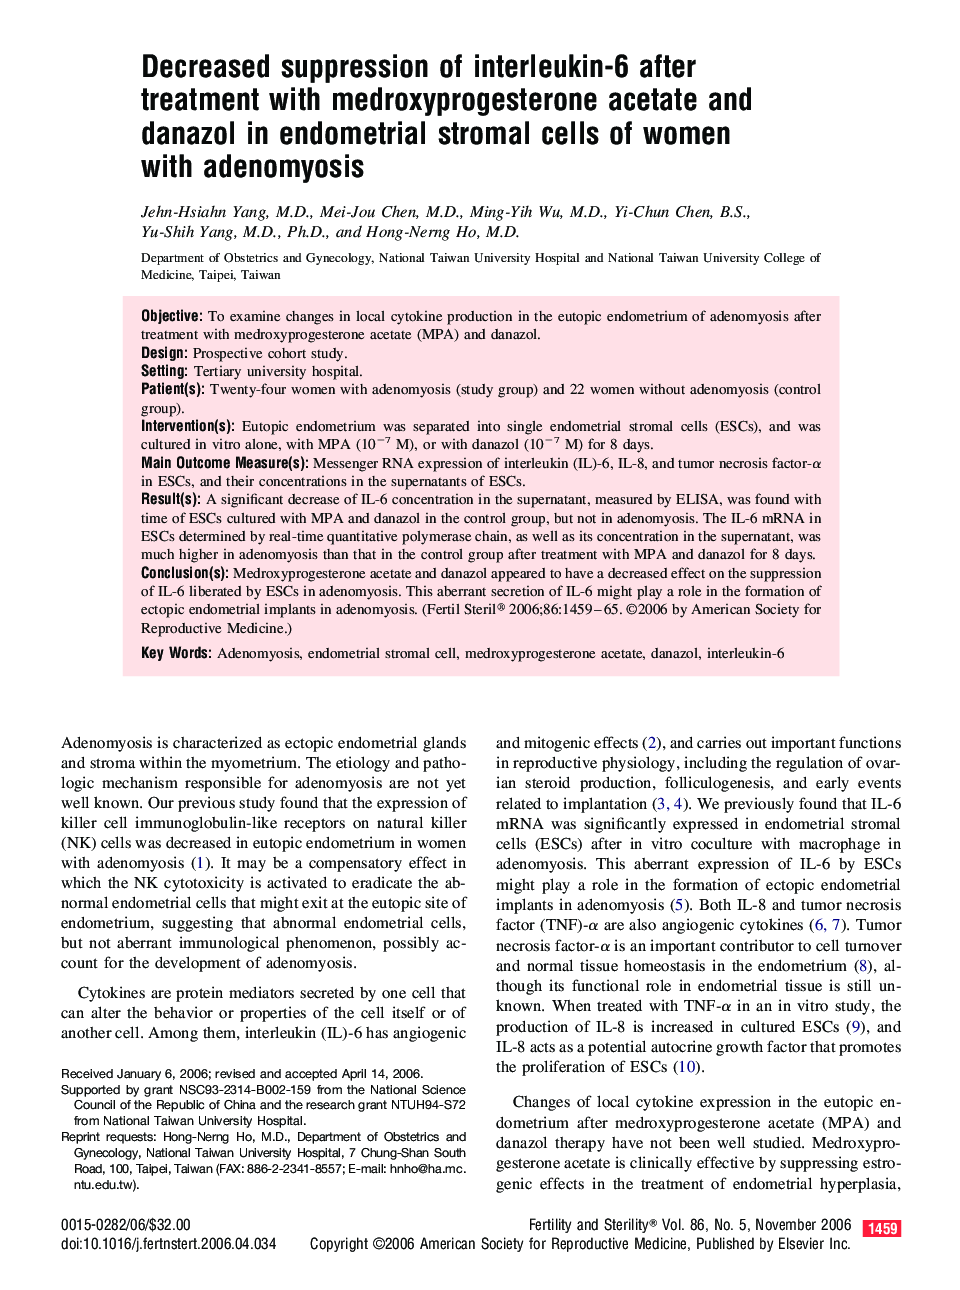 Decreased suppression of interleukin-6 after treatment with medroxyprogesterone acetate and danazol in endometrial stromal cells of women with adenomyosis 